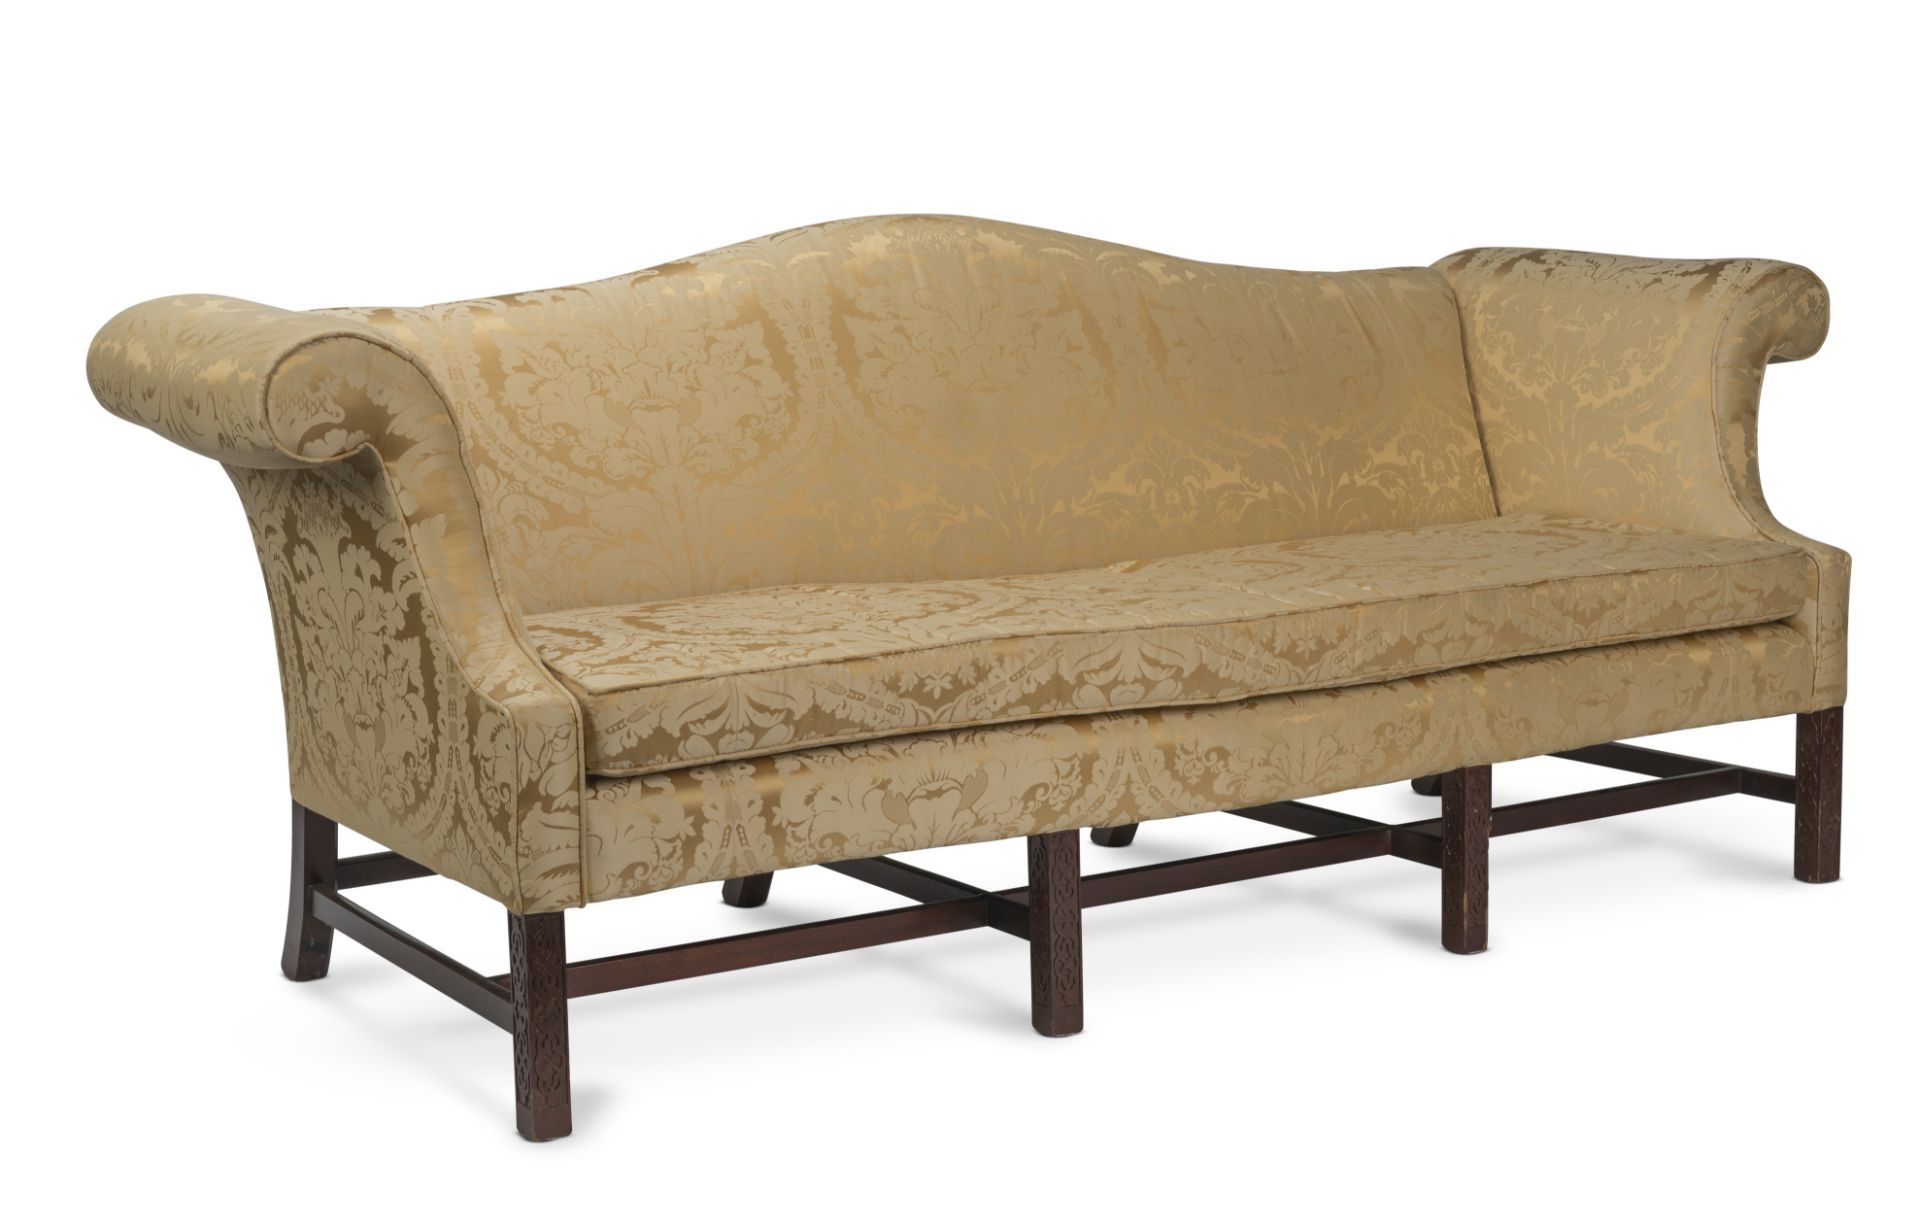 A pair of camelback upholstered mahogany framed sofas, in the George II-styleFirst seen in Seaso...